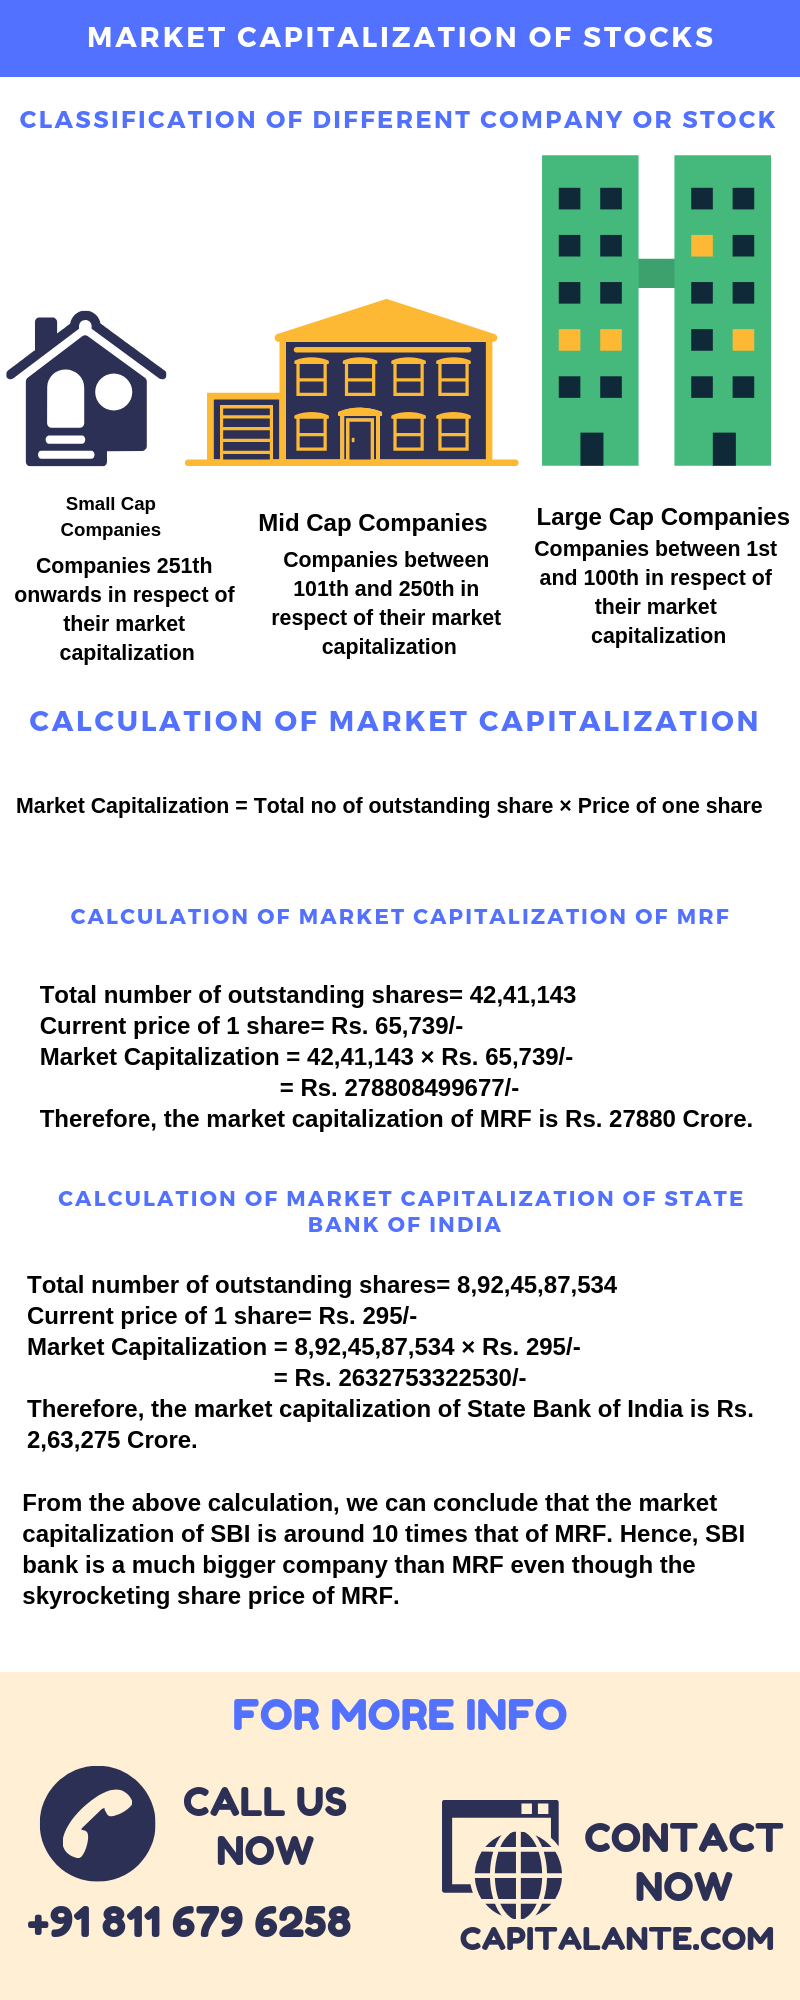 How to pick best stocks - calculation of Market capitalization